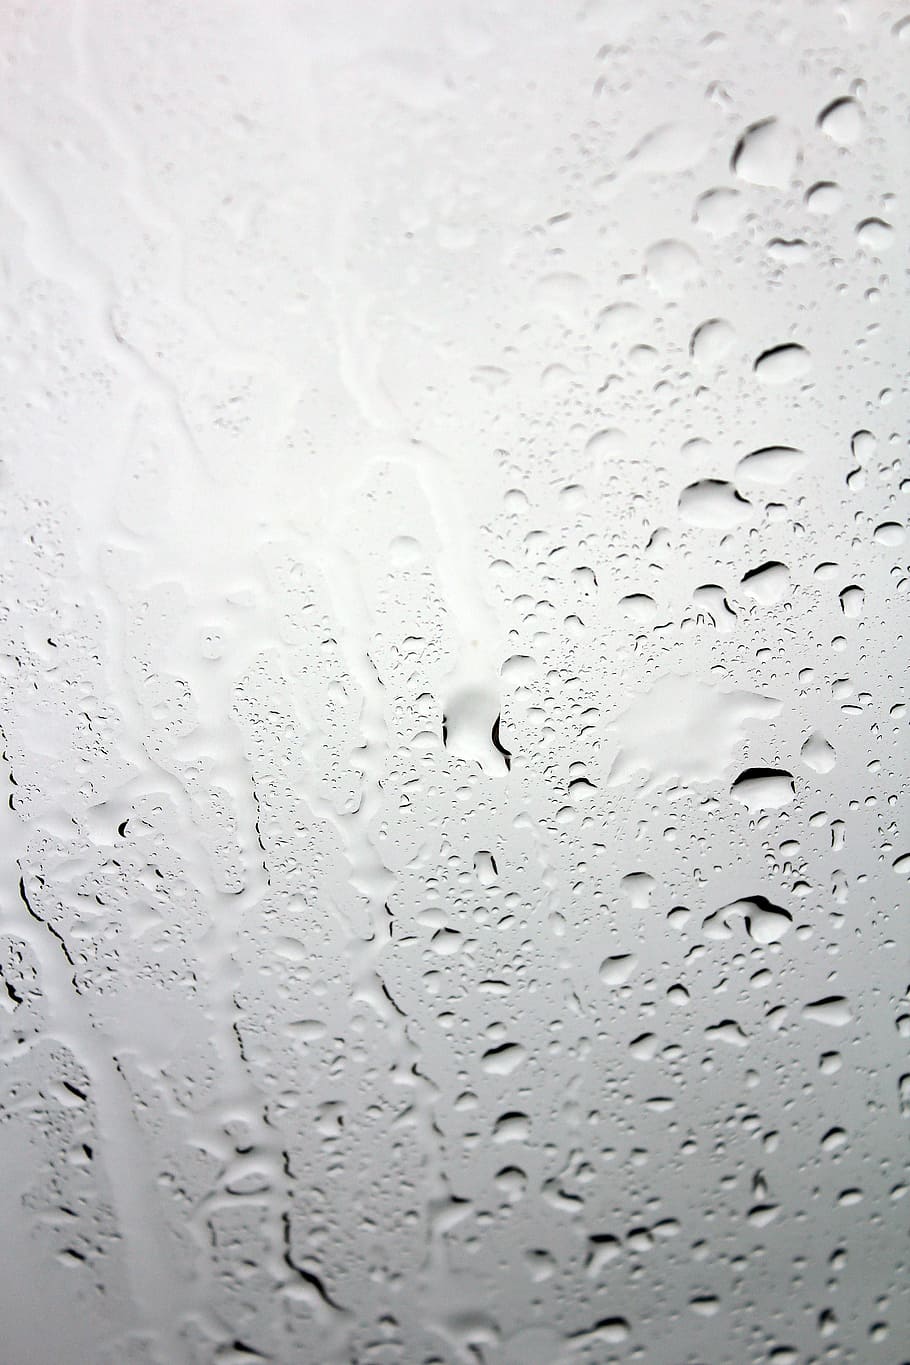 glass with water droplets, Disc, Window, Drip, Wet, rain, depression